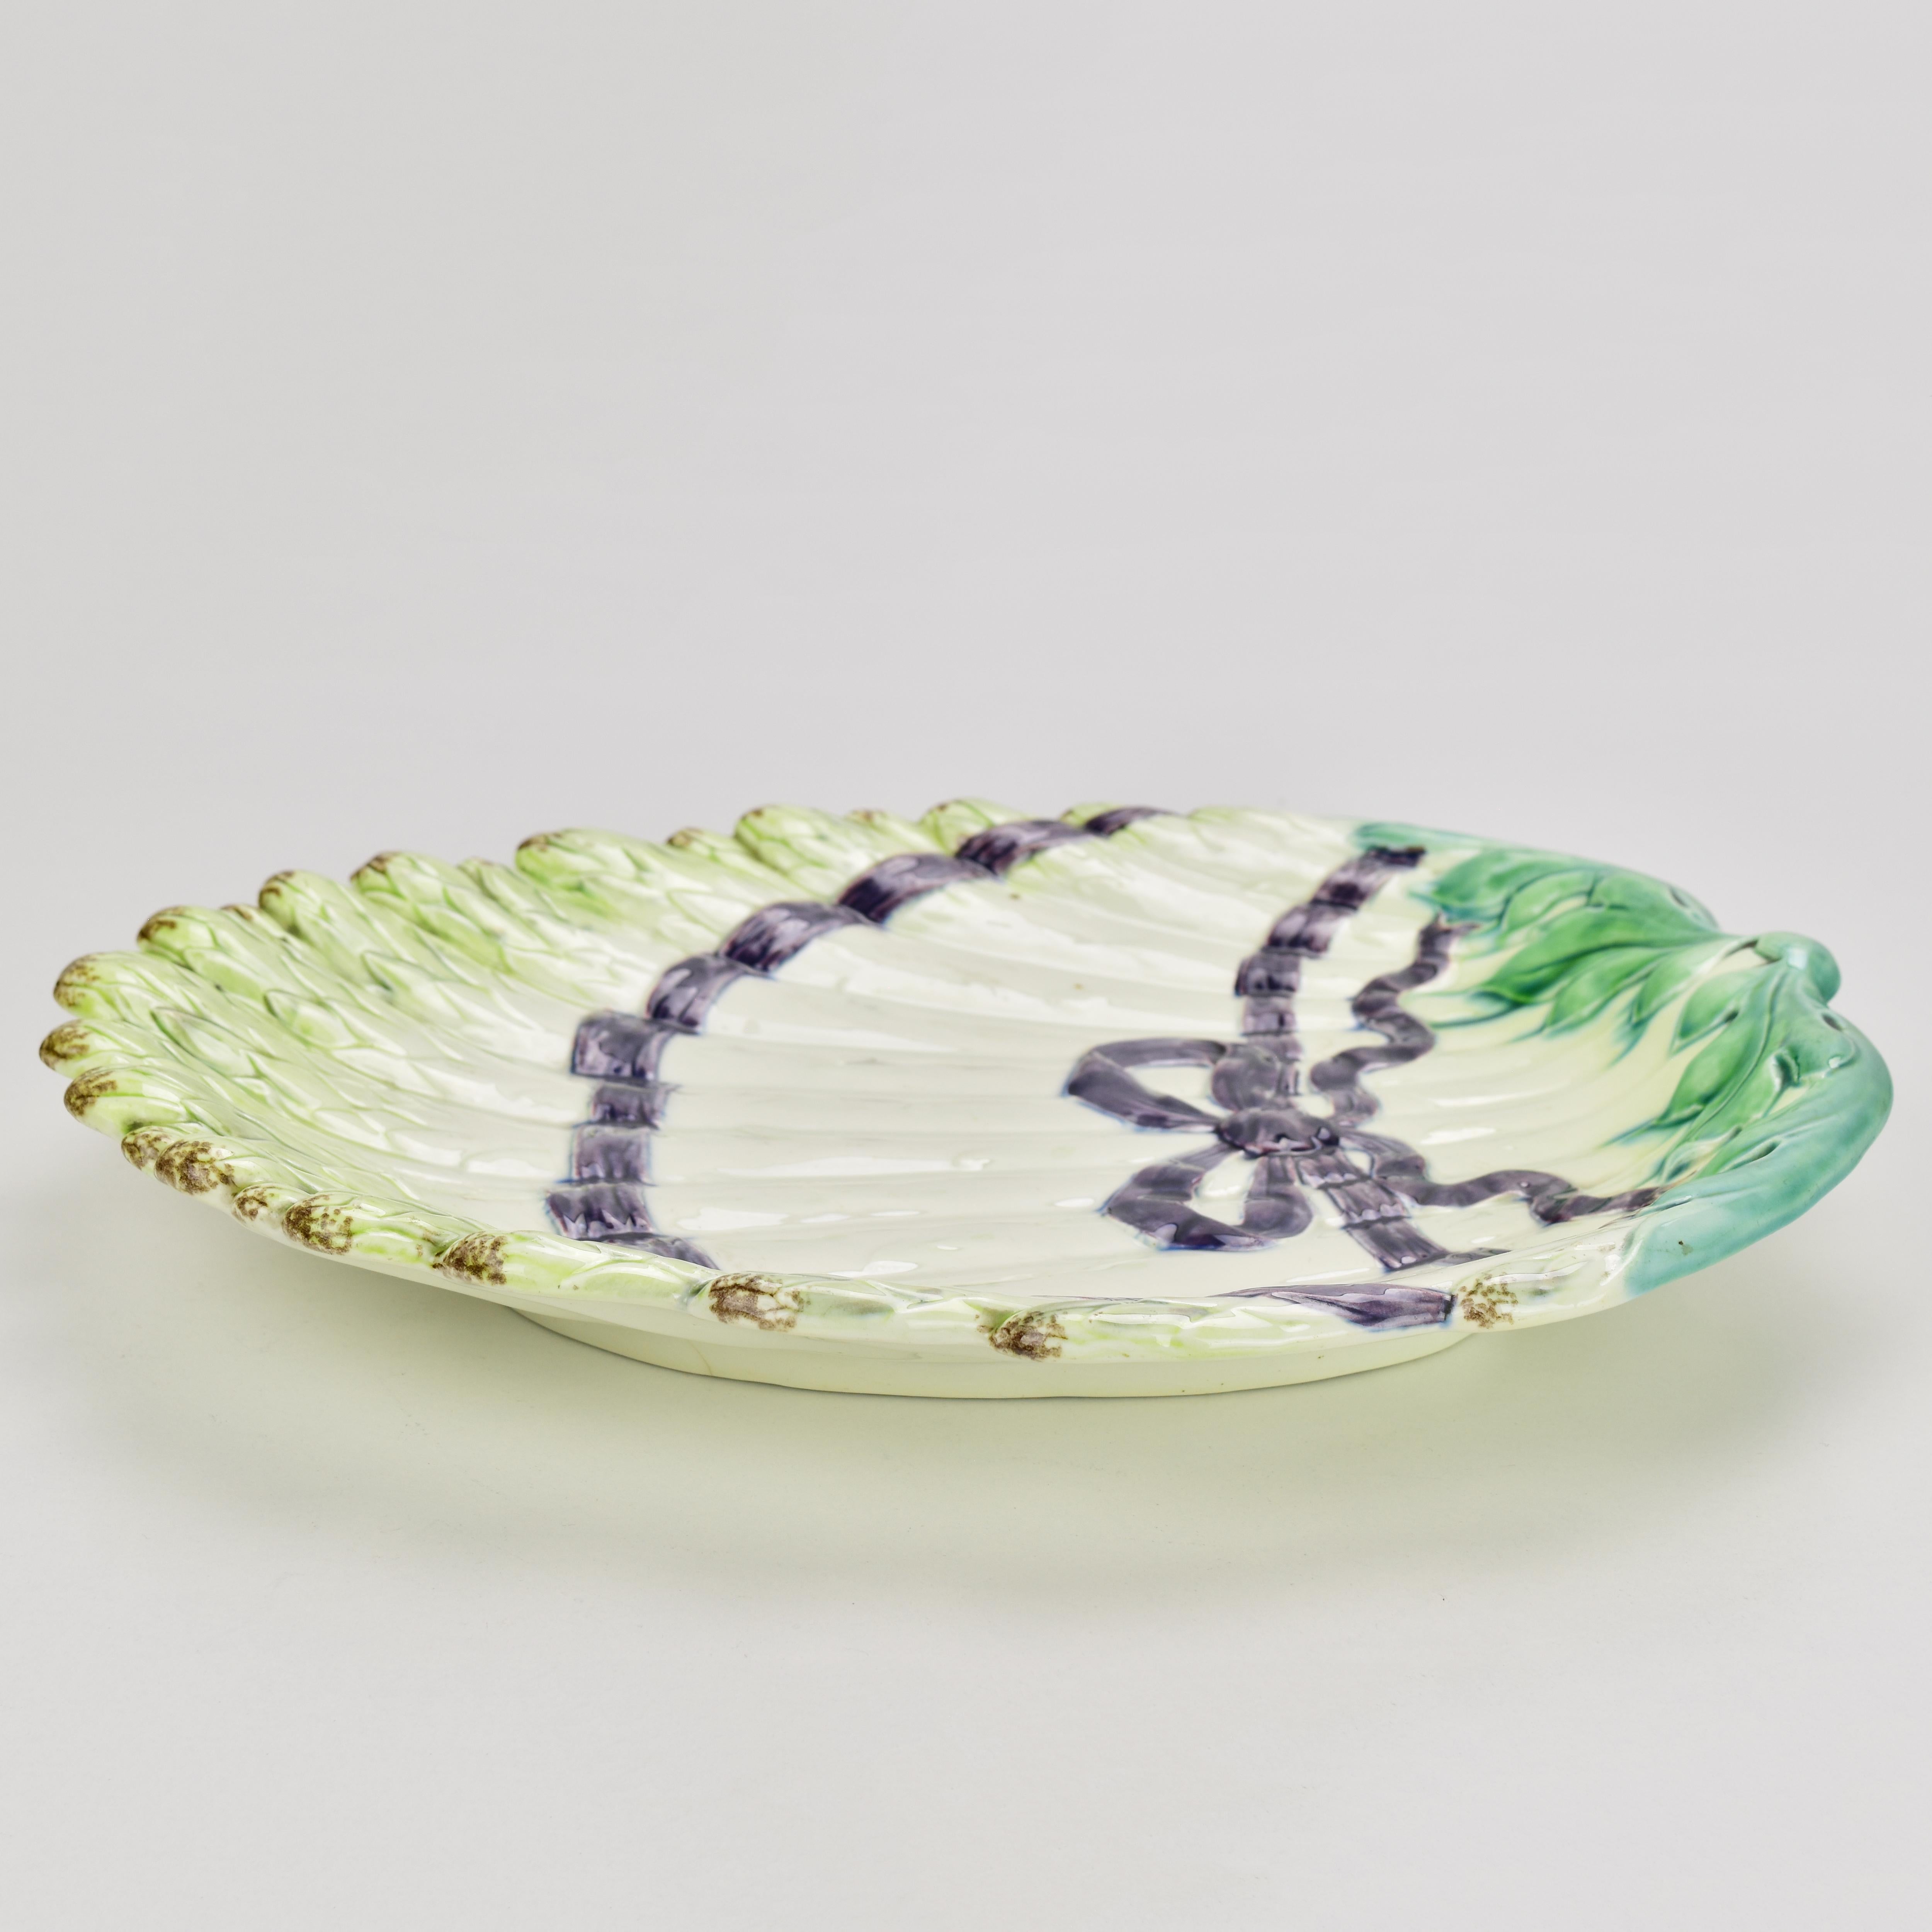 Early 20th Century Asparagus Serving Dish Plate Majolica Art Nouveau Glazed Pottery Ceramic  For Sale